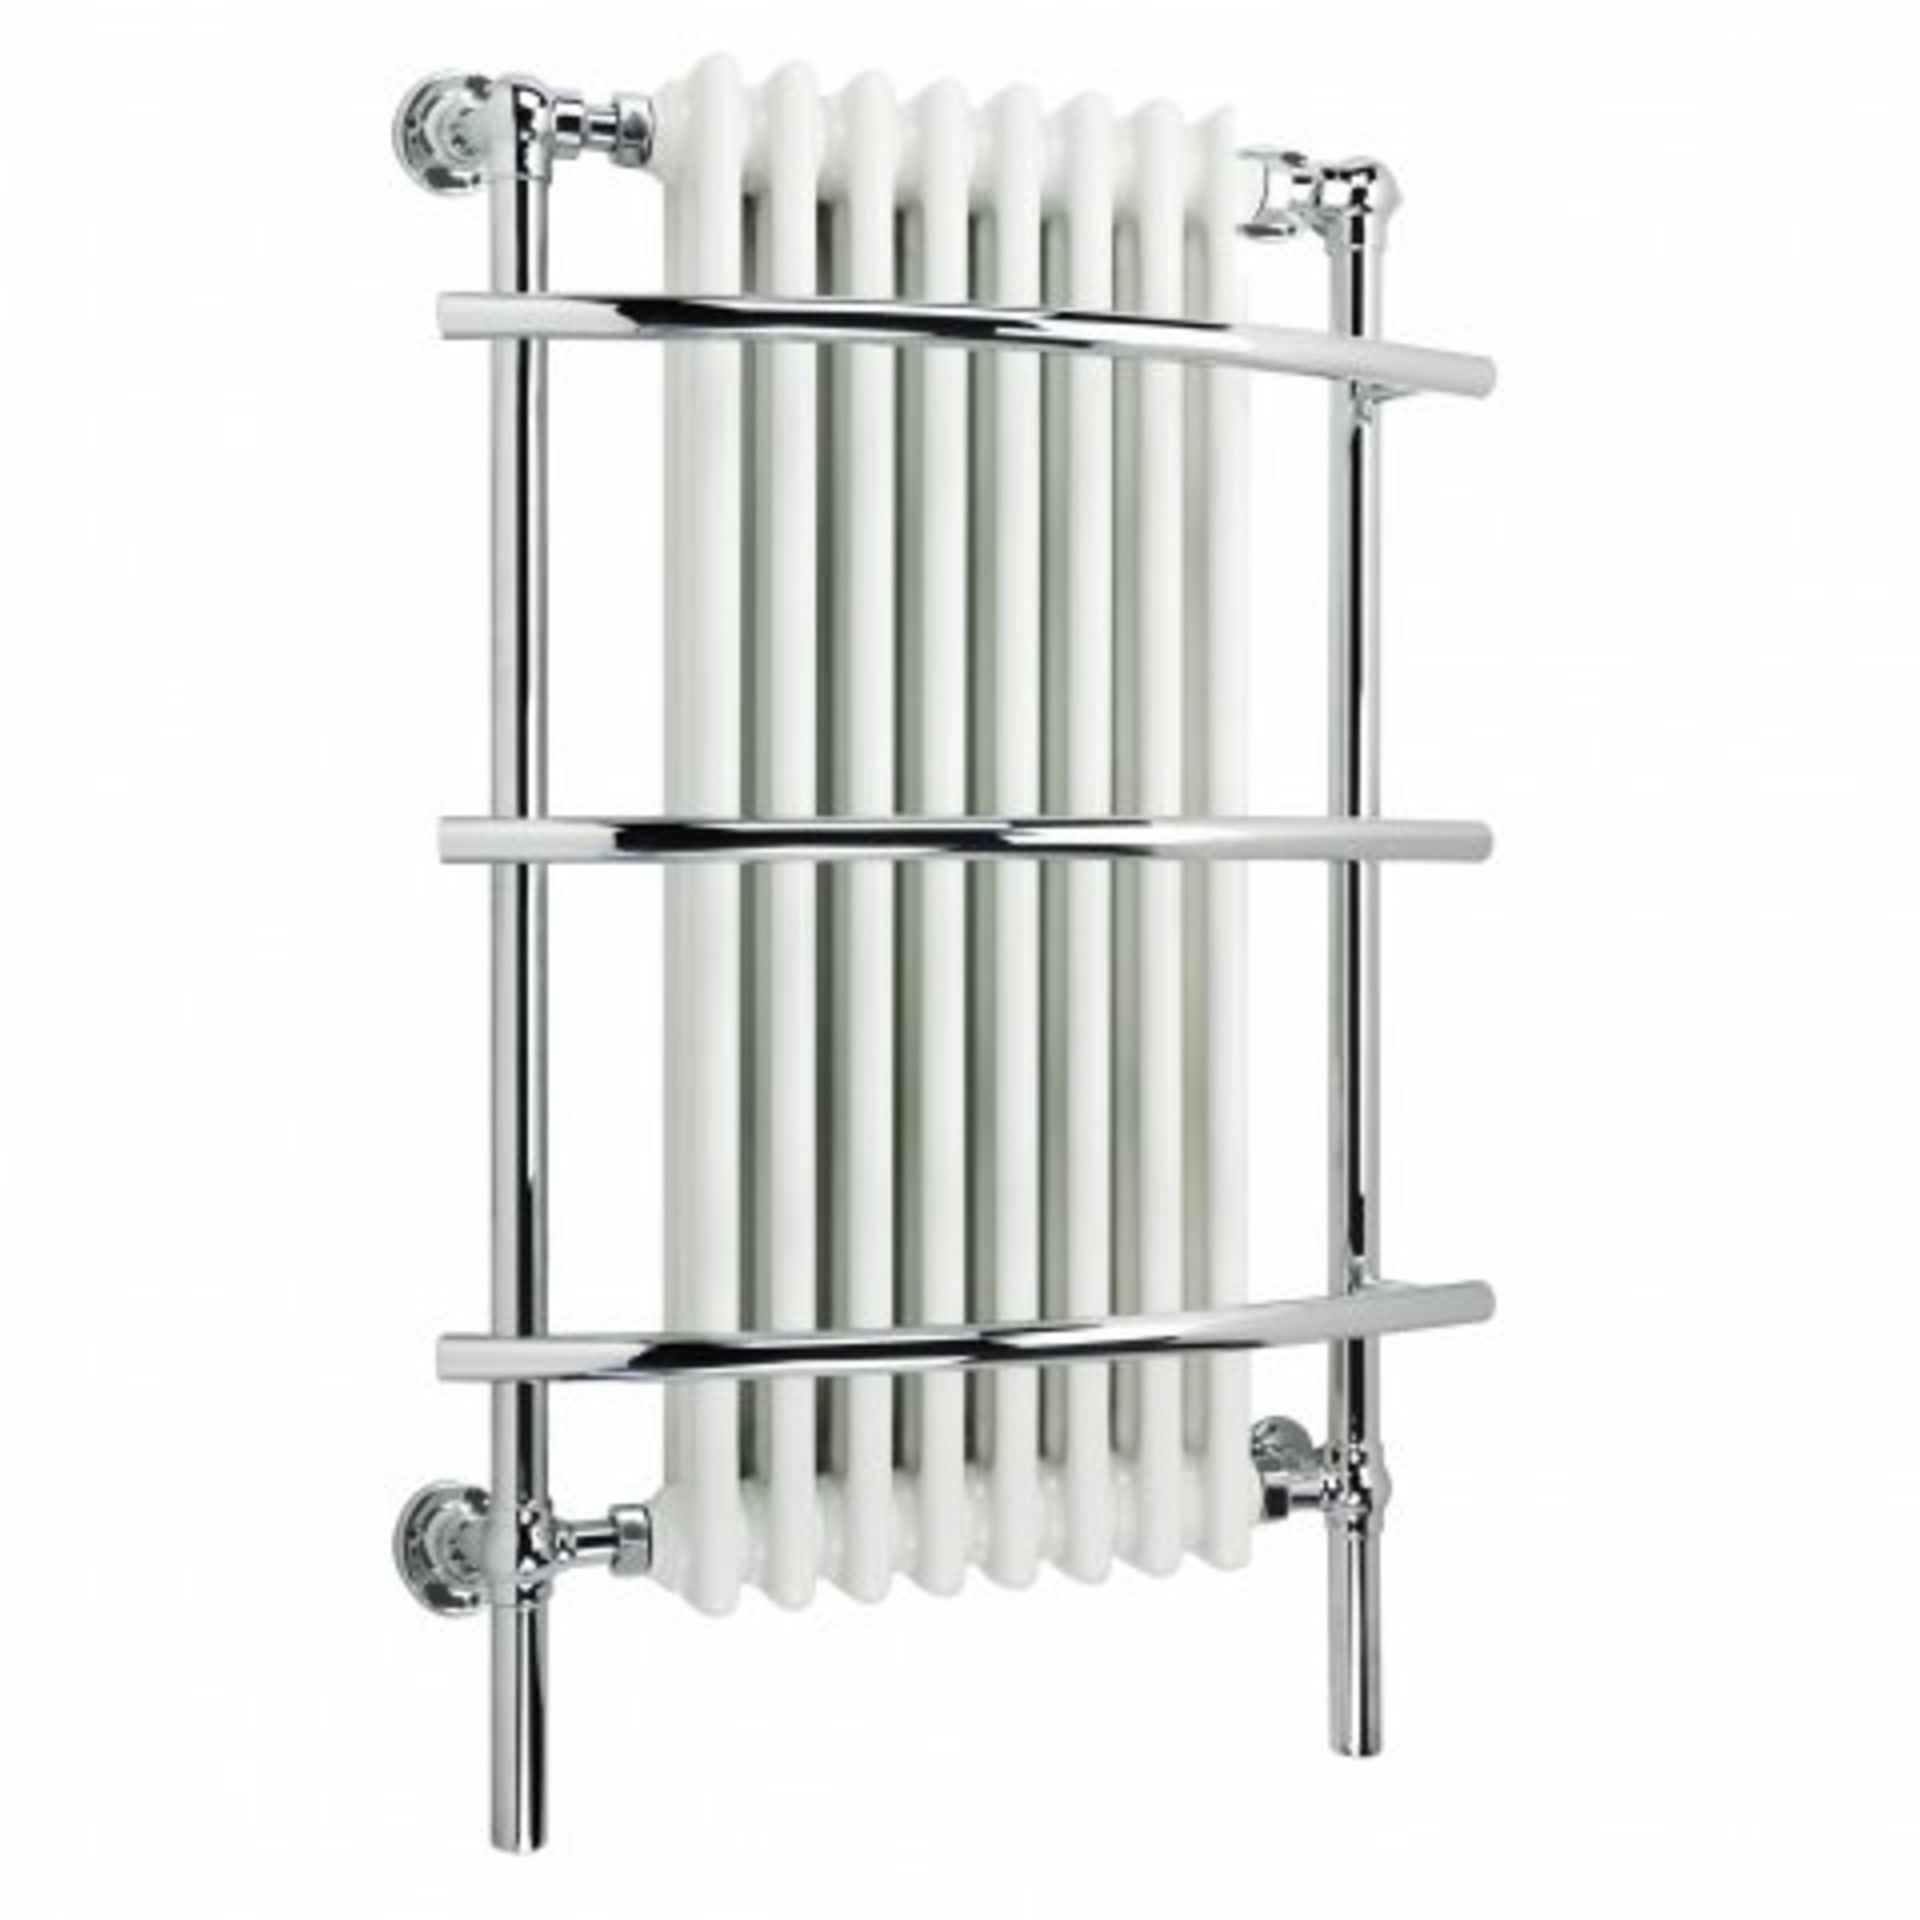 (H12) 1000x635mm Traditional White Wall Mounted Towel Rail Radiator - Victoria Premium. RRP £719.99. - Image 3 of 5